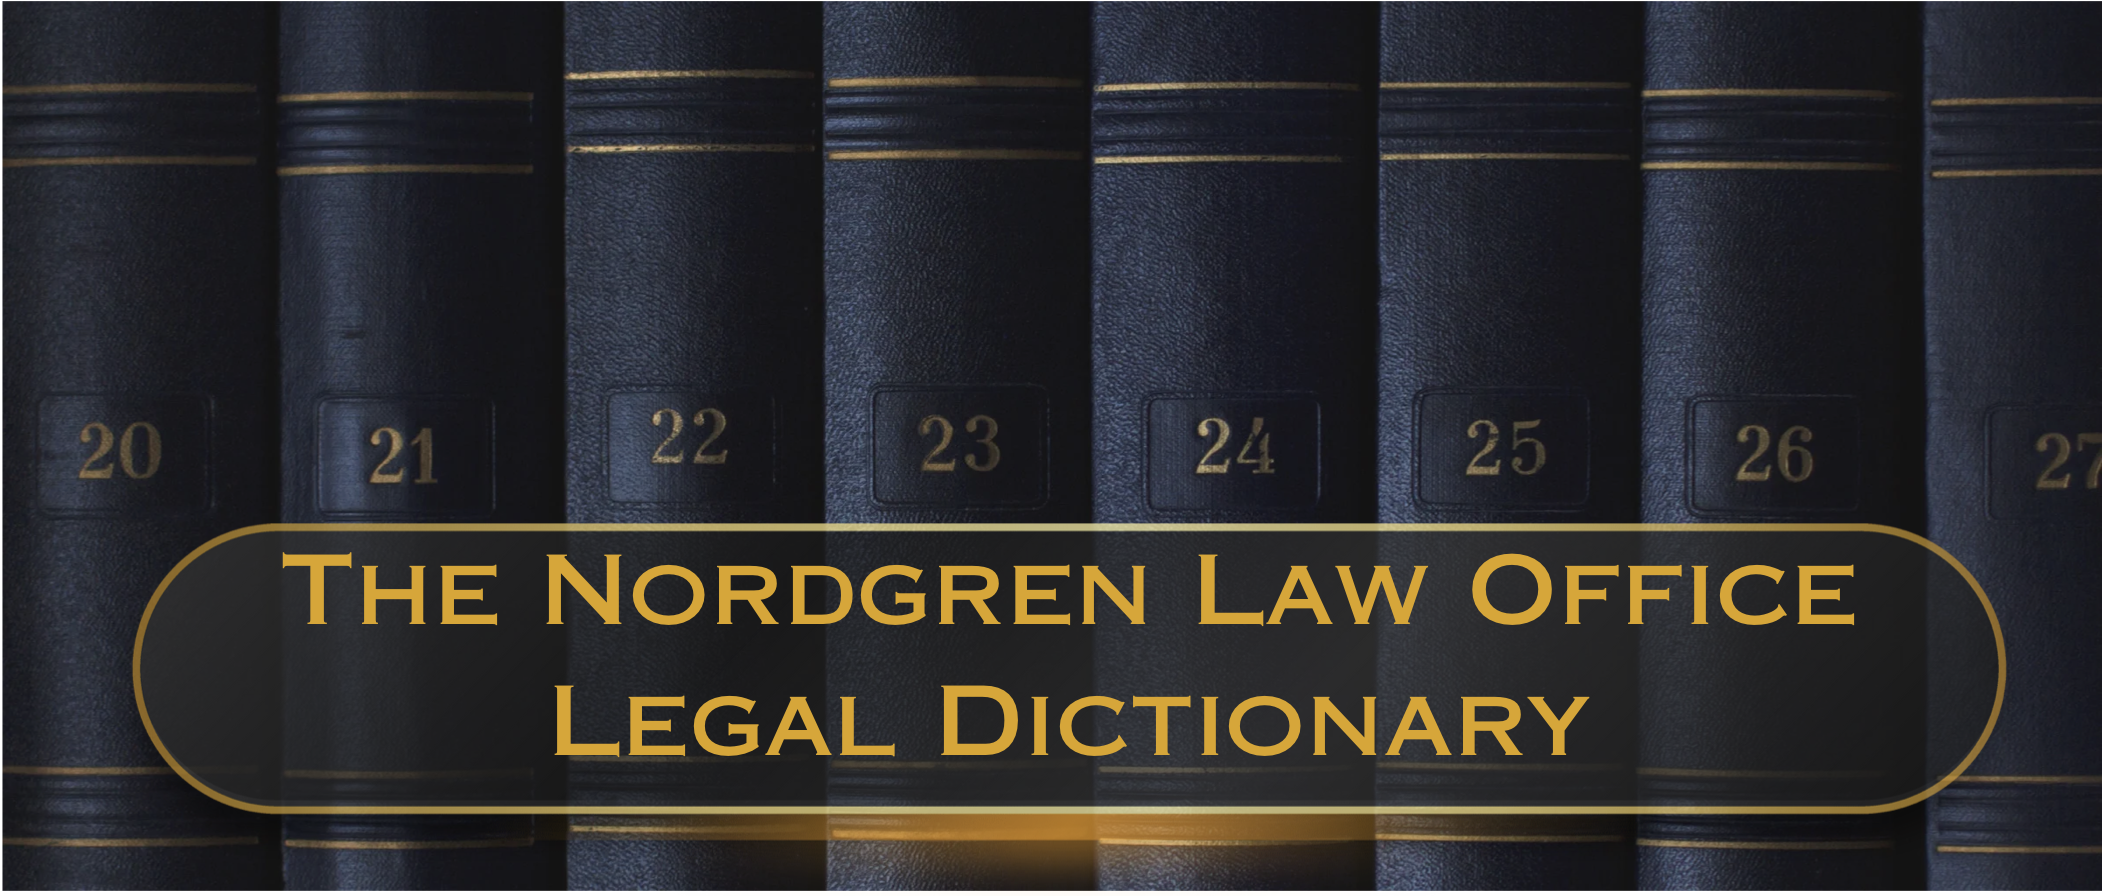 The Nordgren Law Office Legal Dictionary, Translating Legal Jargon, Legal books in the background